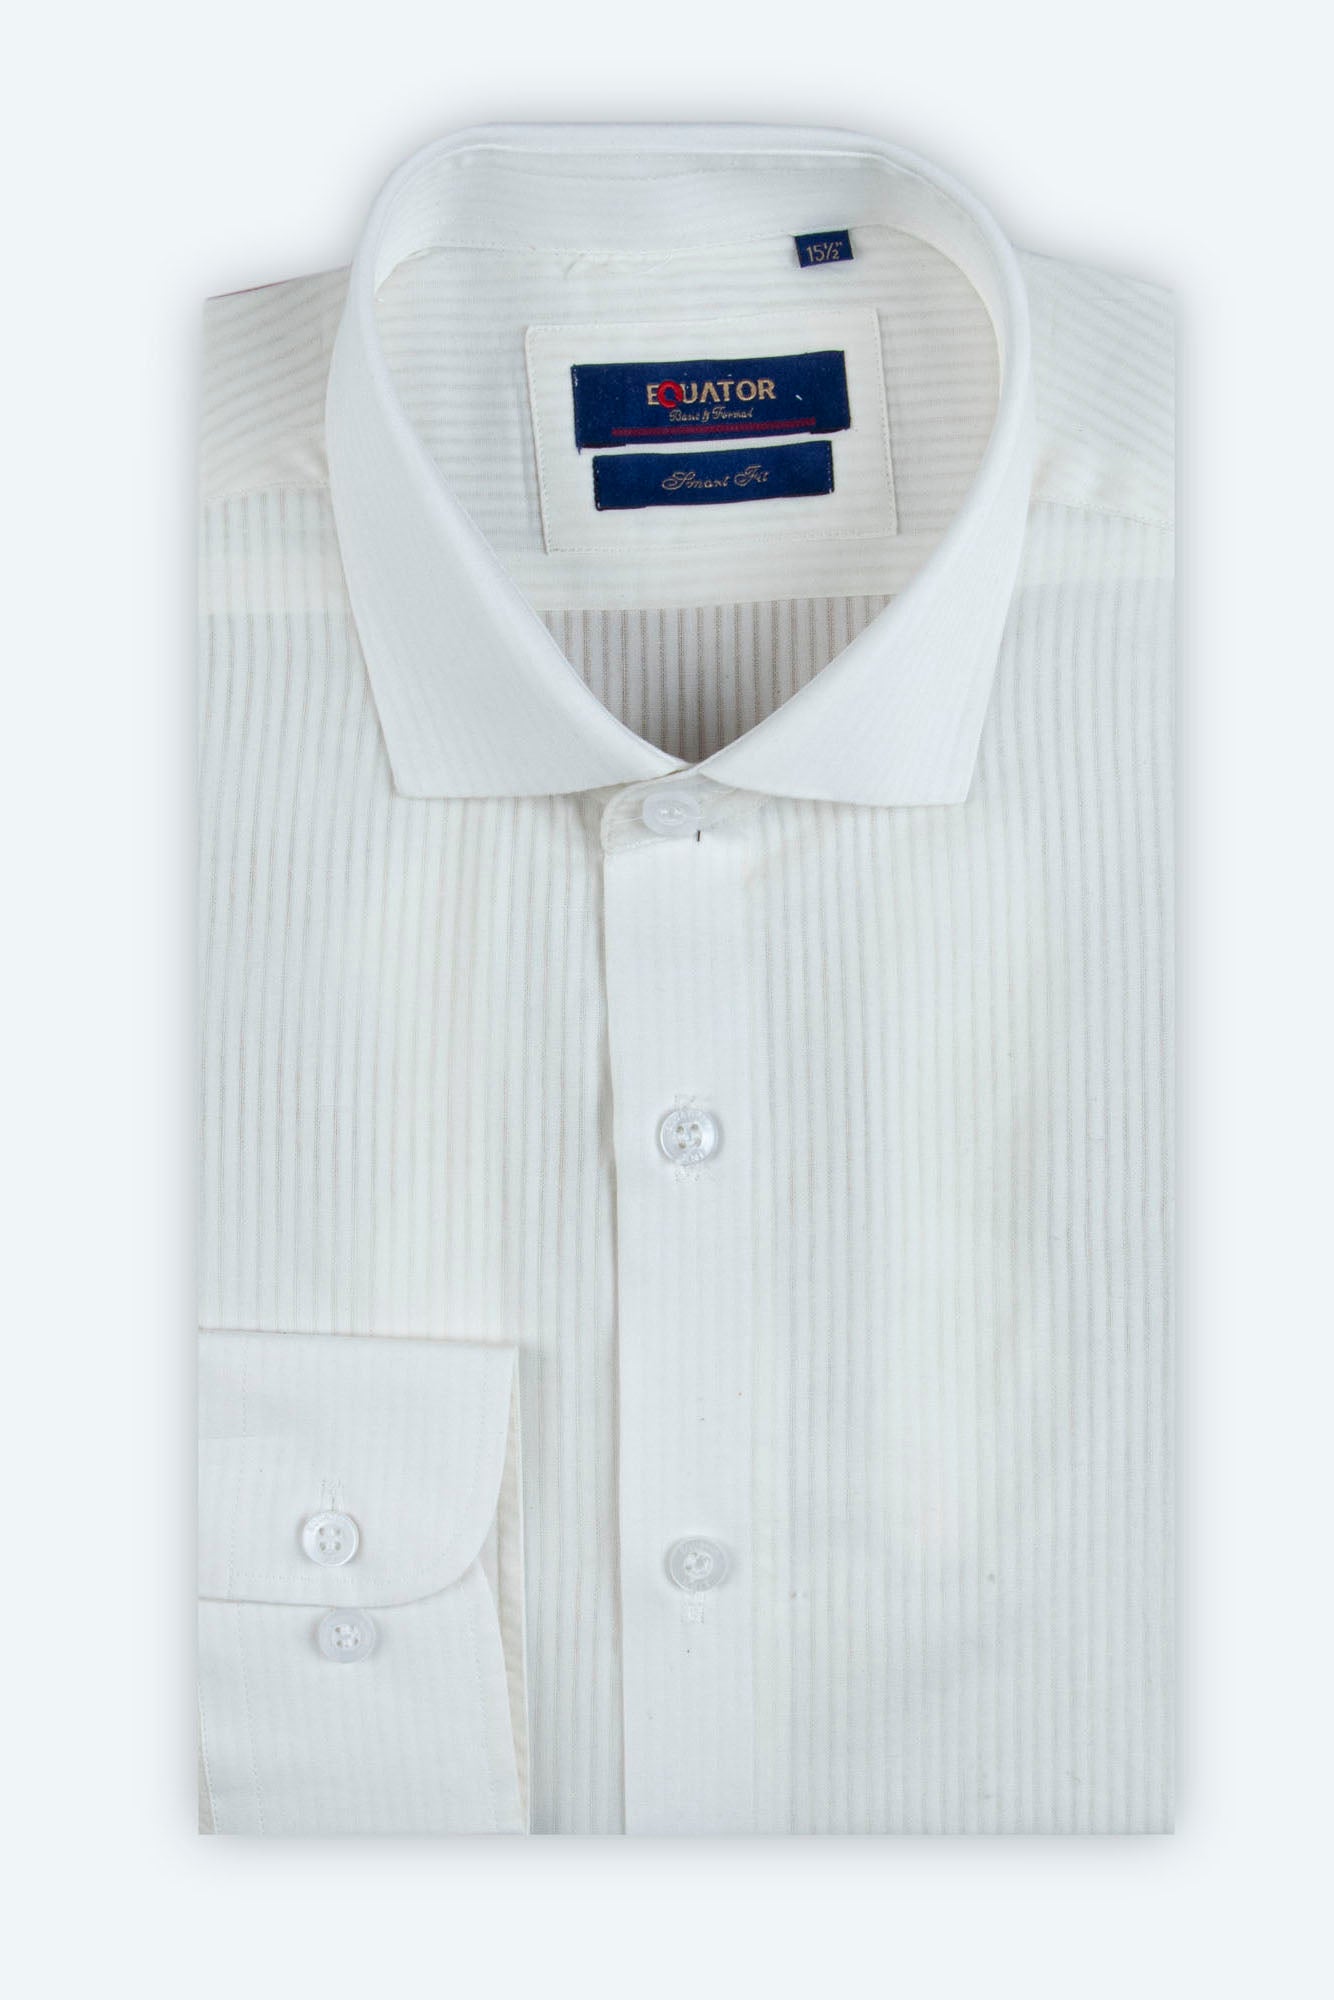 White Lined Formal Shirt